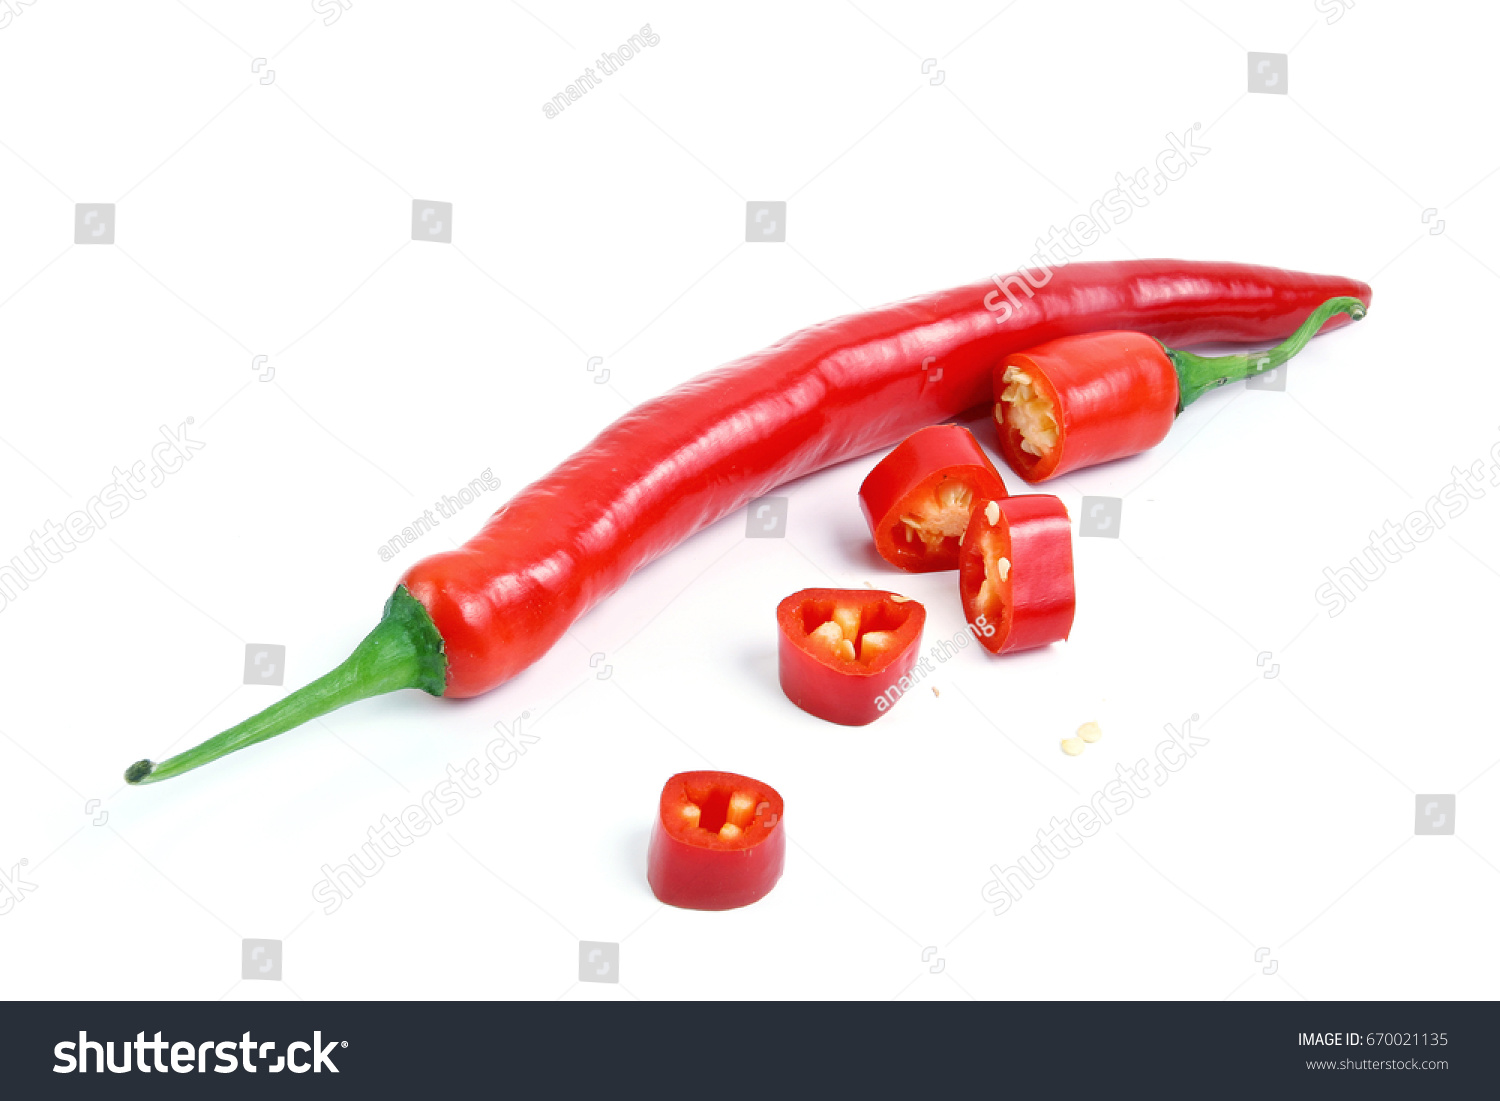 Red chilli or chili peppers cut into pieces isolated on a white background. #670021135